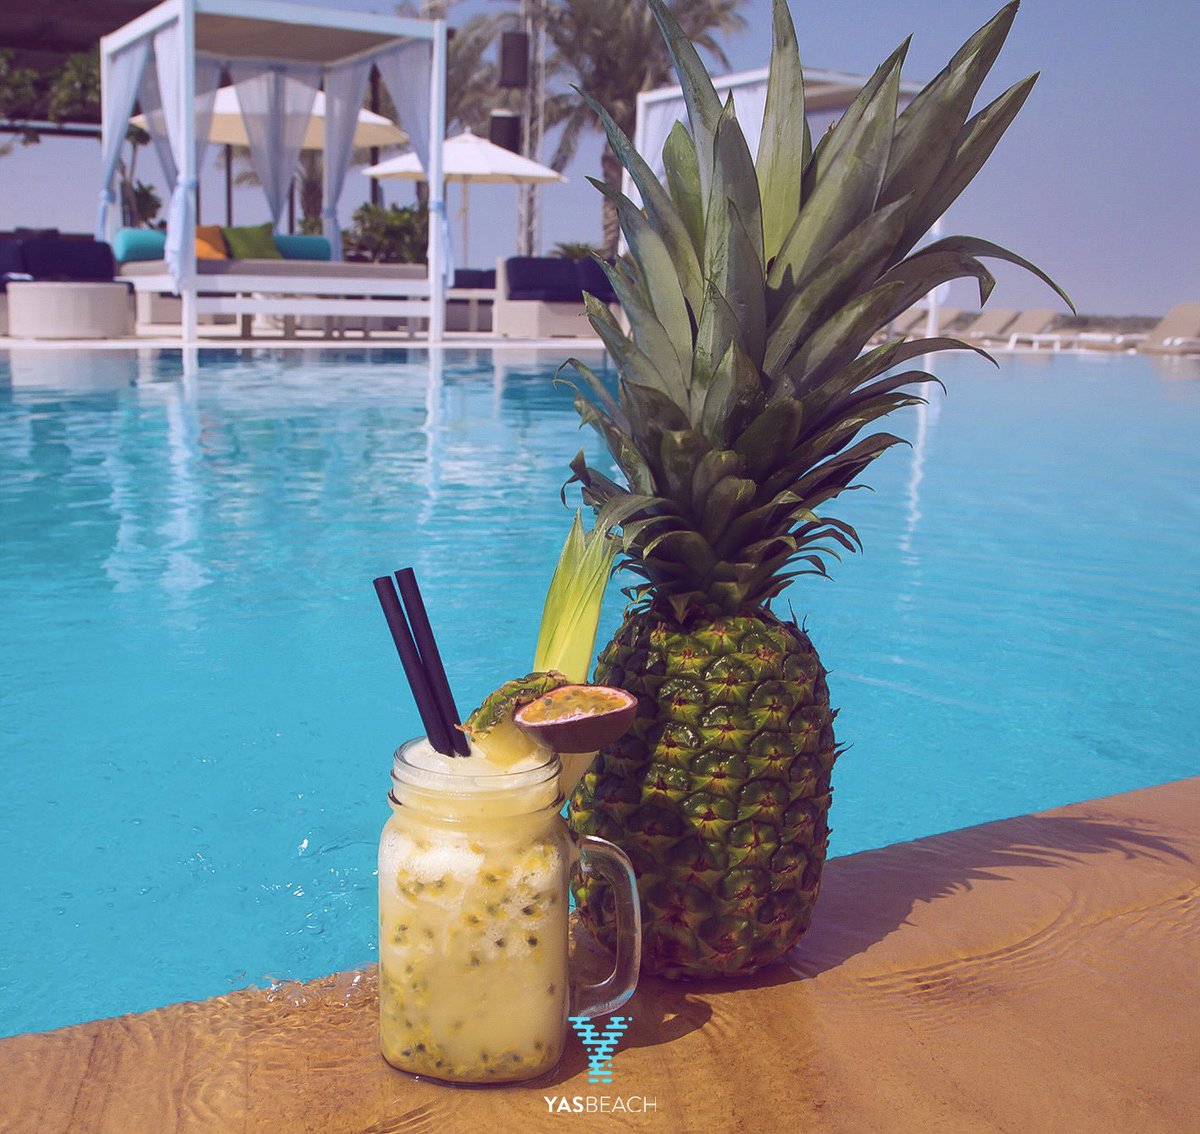 Smoothies are great for outdoor refreshment, a nutritional breakfast or just simply to quench your thirst. Enjoy our 🍍#PineappleSmoothie made from Pineapple, Banana, Passion Fruit and Almond Milk.

#yasbeach #pineapple #smoothie #healthyeating #healthysmoothie #fruits